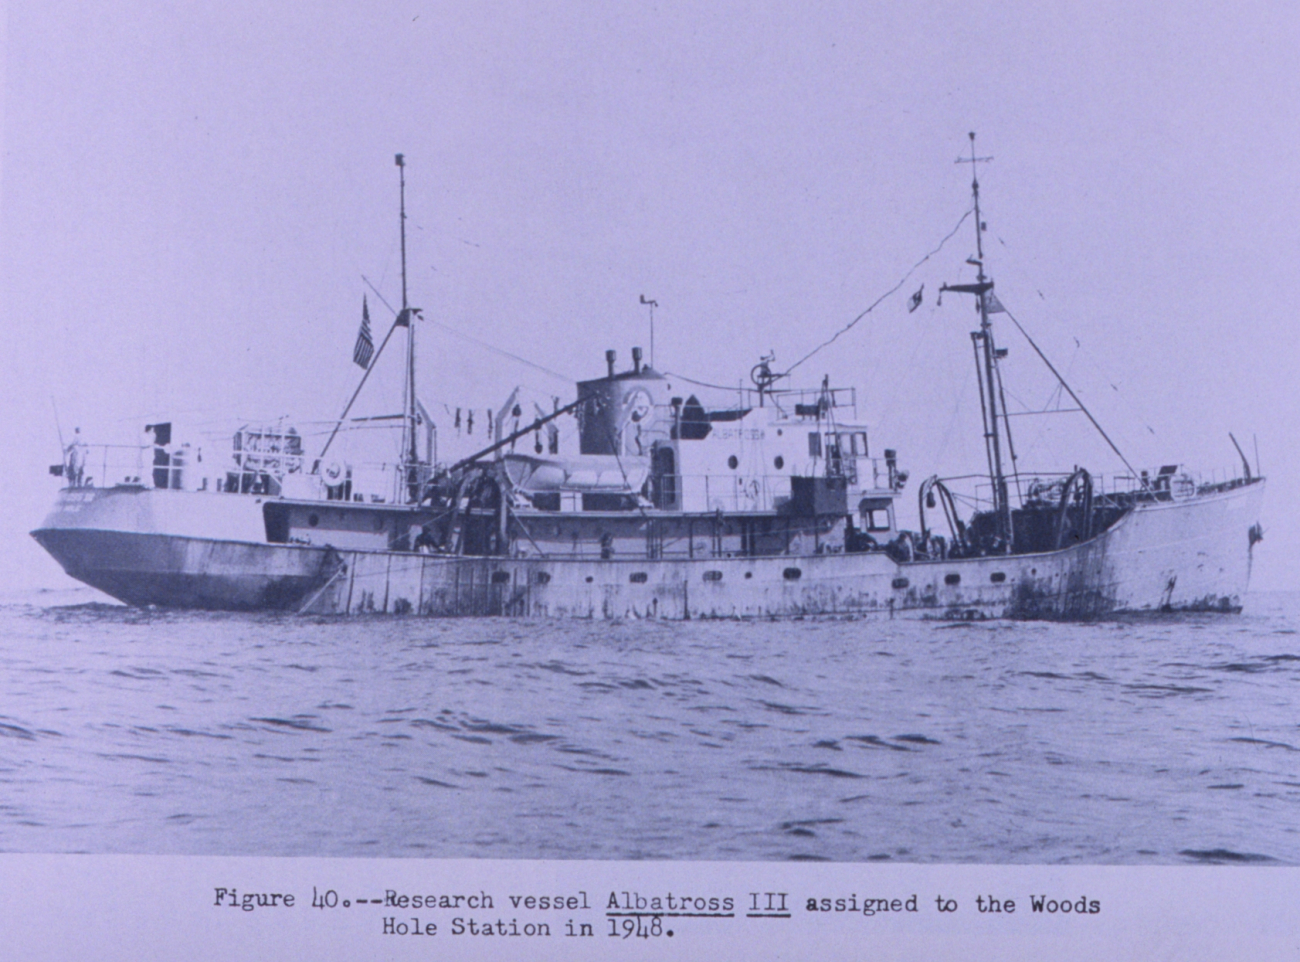 Research vessel ALBATROSS III assigned to Woods Hole in 1948